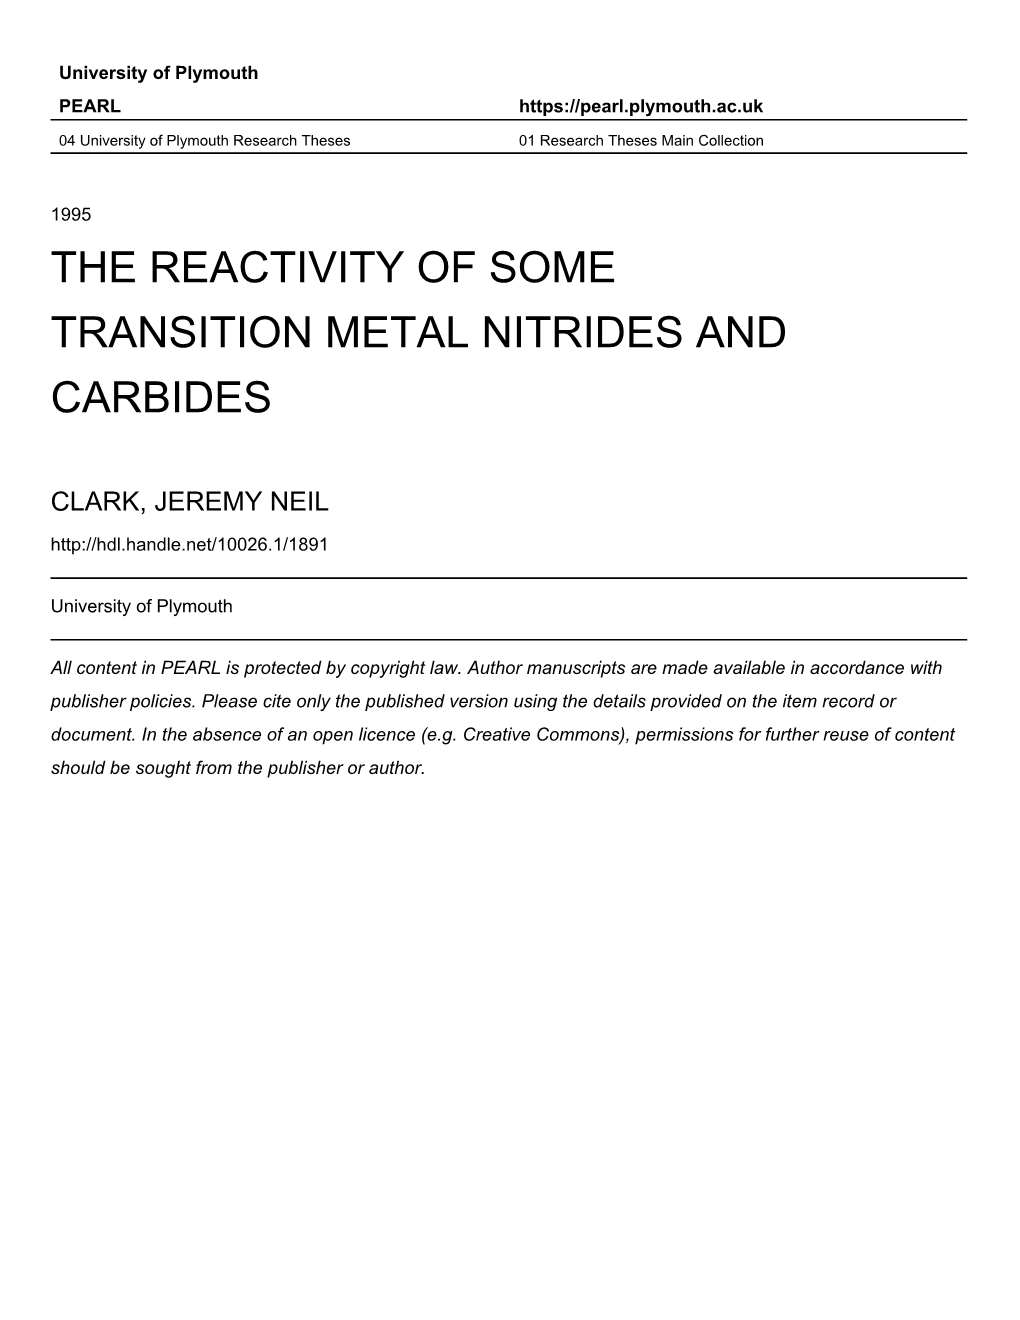 THE REACTIVITY of SOME TRANSITION METAL NITRIDES and CARBIDES by JEREMY NEIL CLARK a Thesis Submitted to the University of Plymo